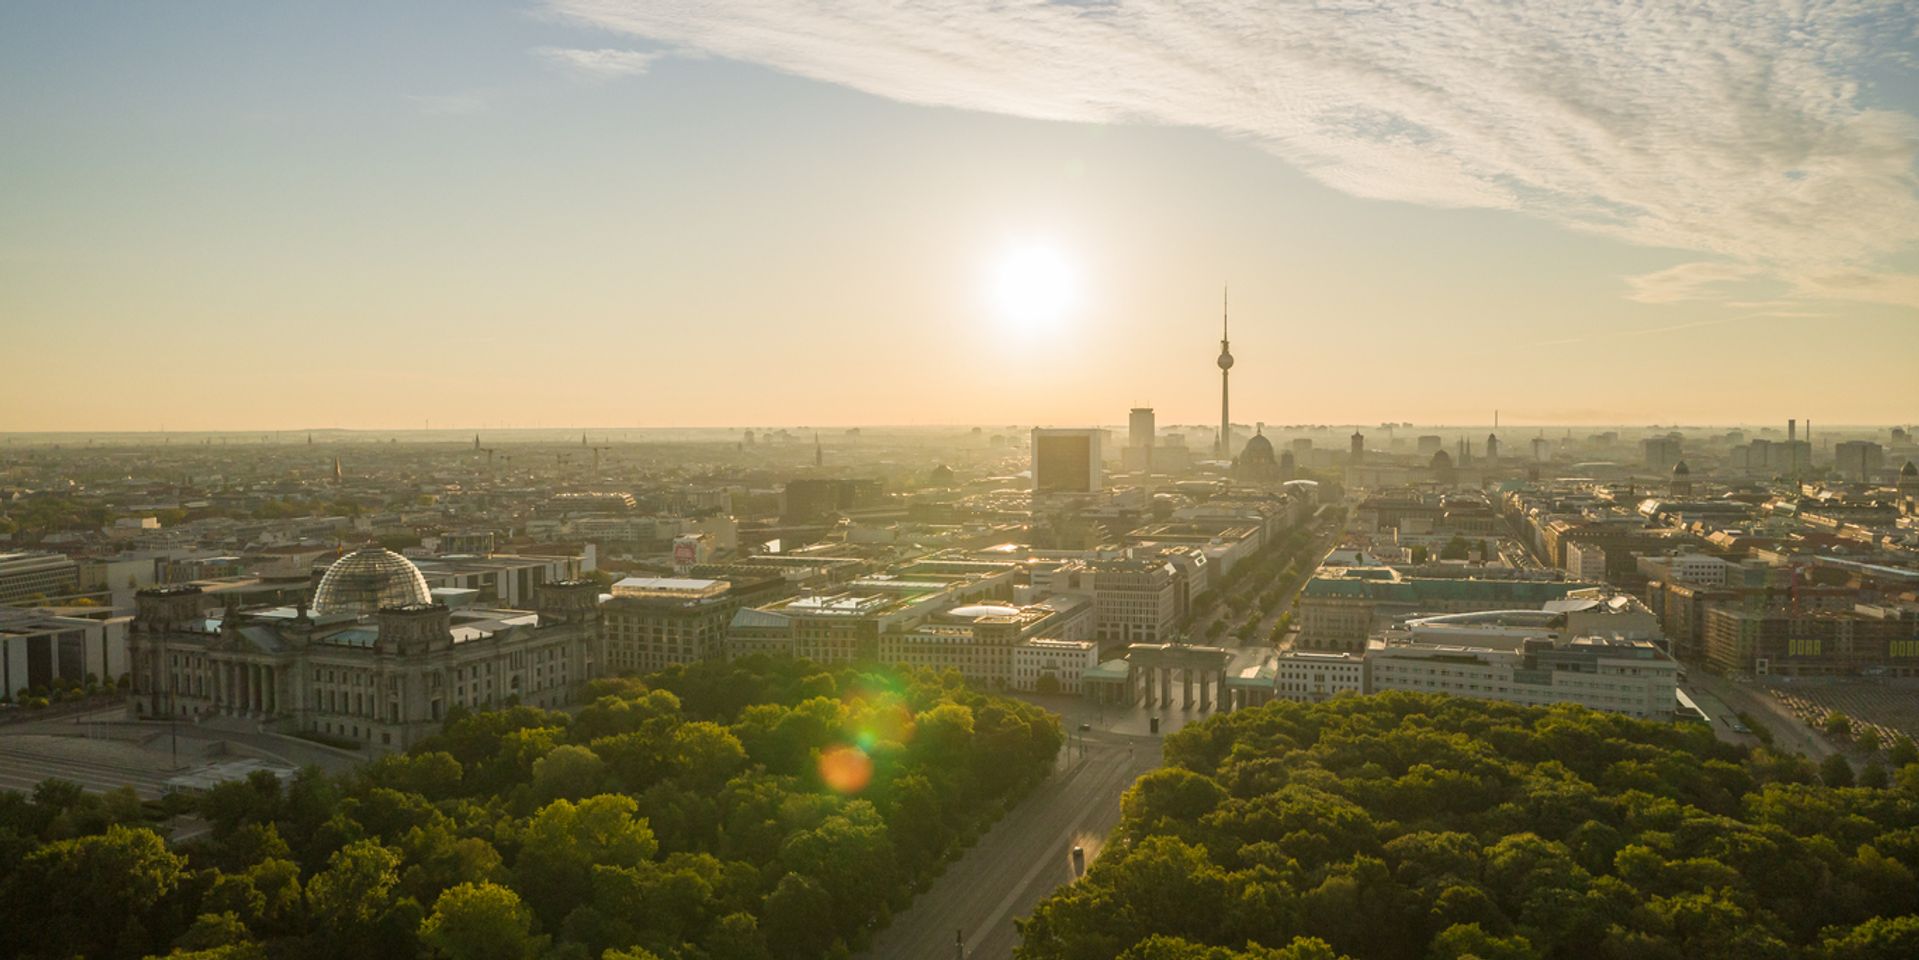 Arial view of Berlin landscape